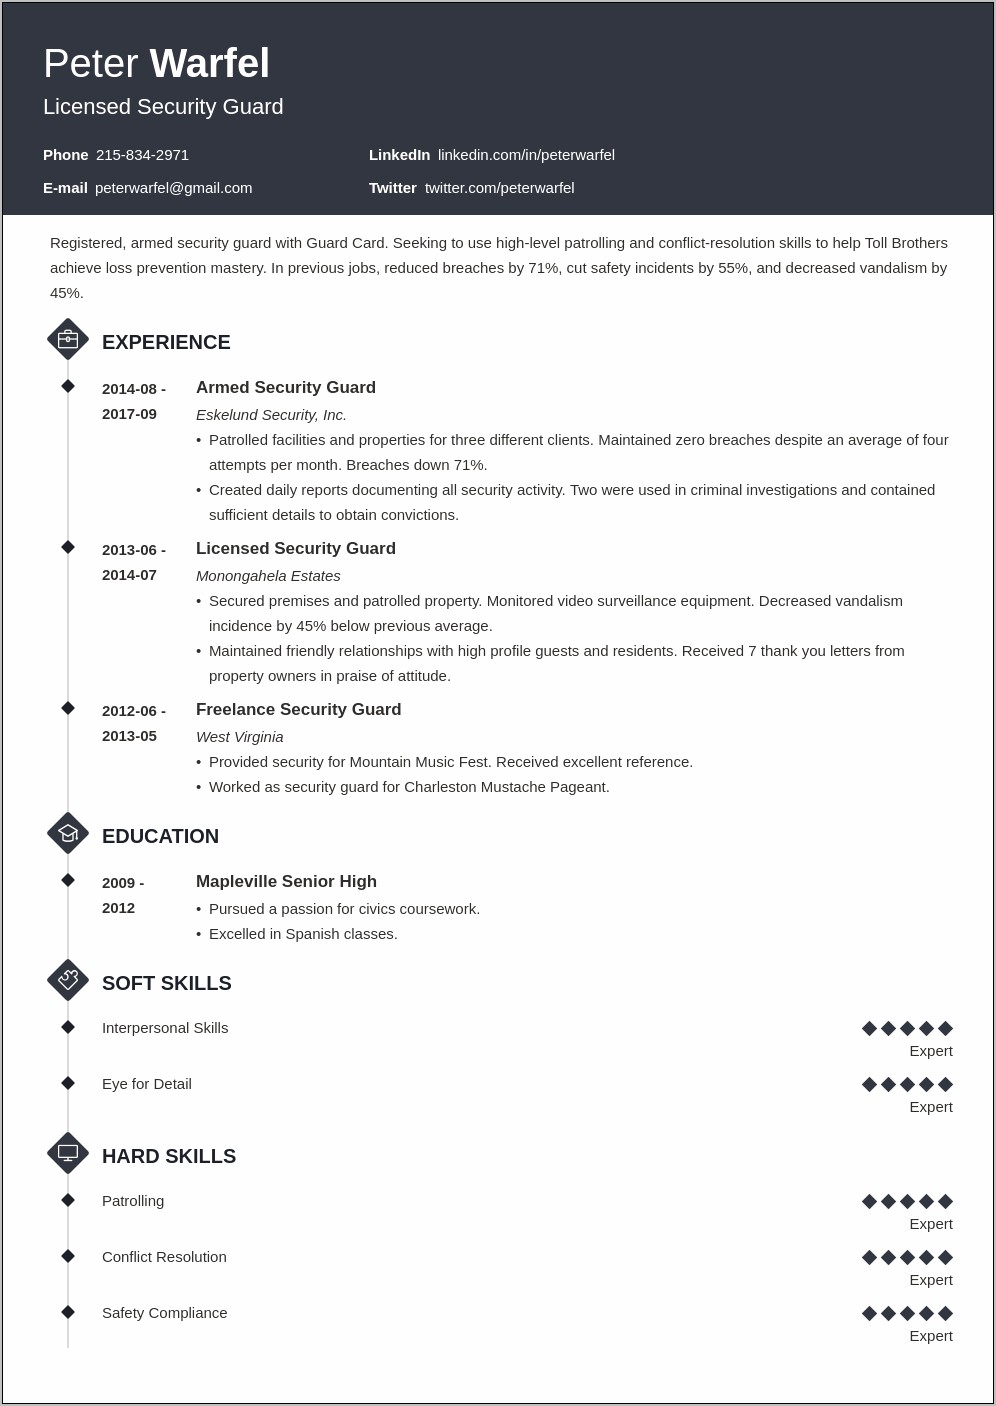 Access Control Officer Resume Sample